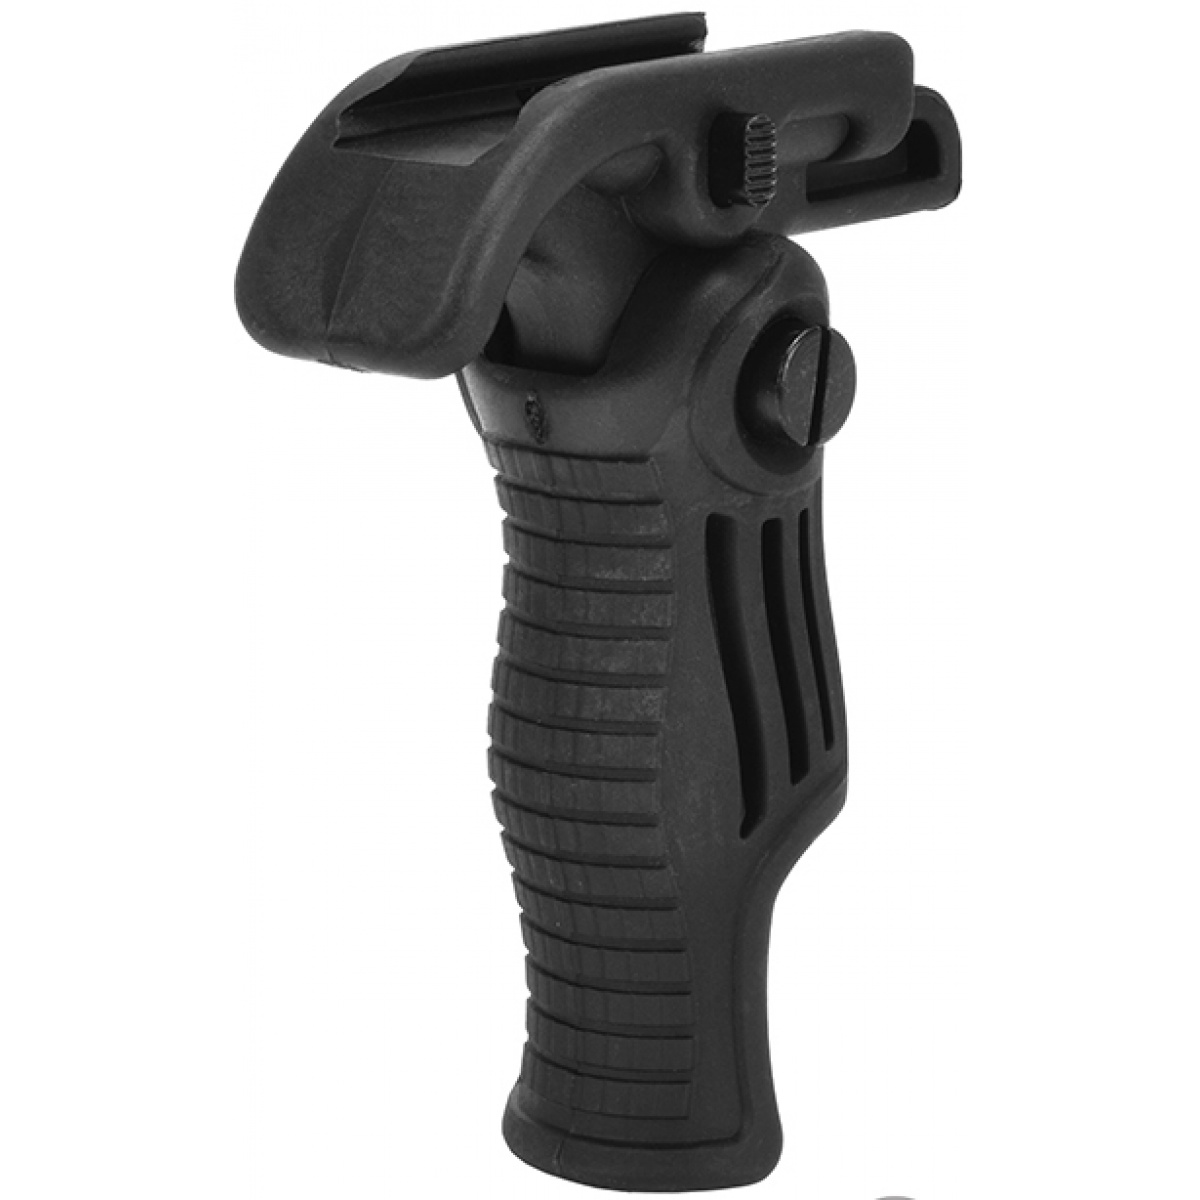 Cyma Airsoft Tactical Folding Vertical ForeGrip Weaver Mount TAN CM-C57T 